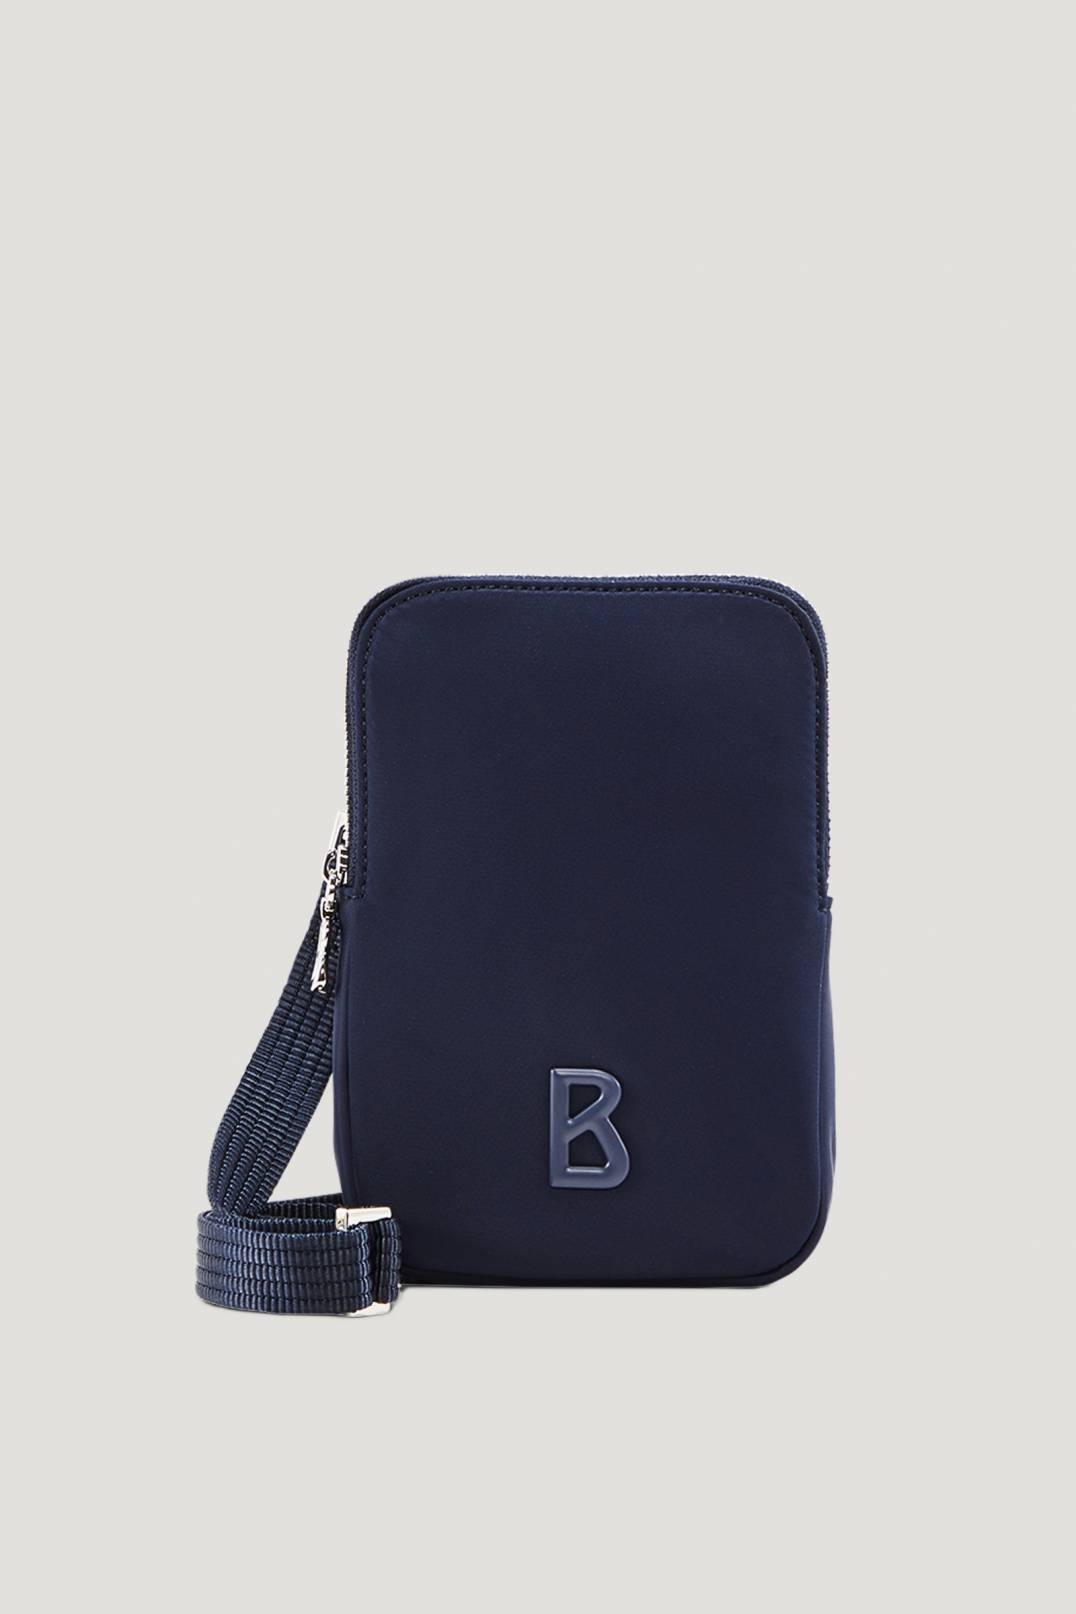 VERBIER PLAY JOHANNA SMARTPHONE POUCH IN NAVY BLUE - 1